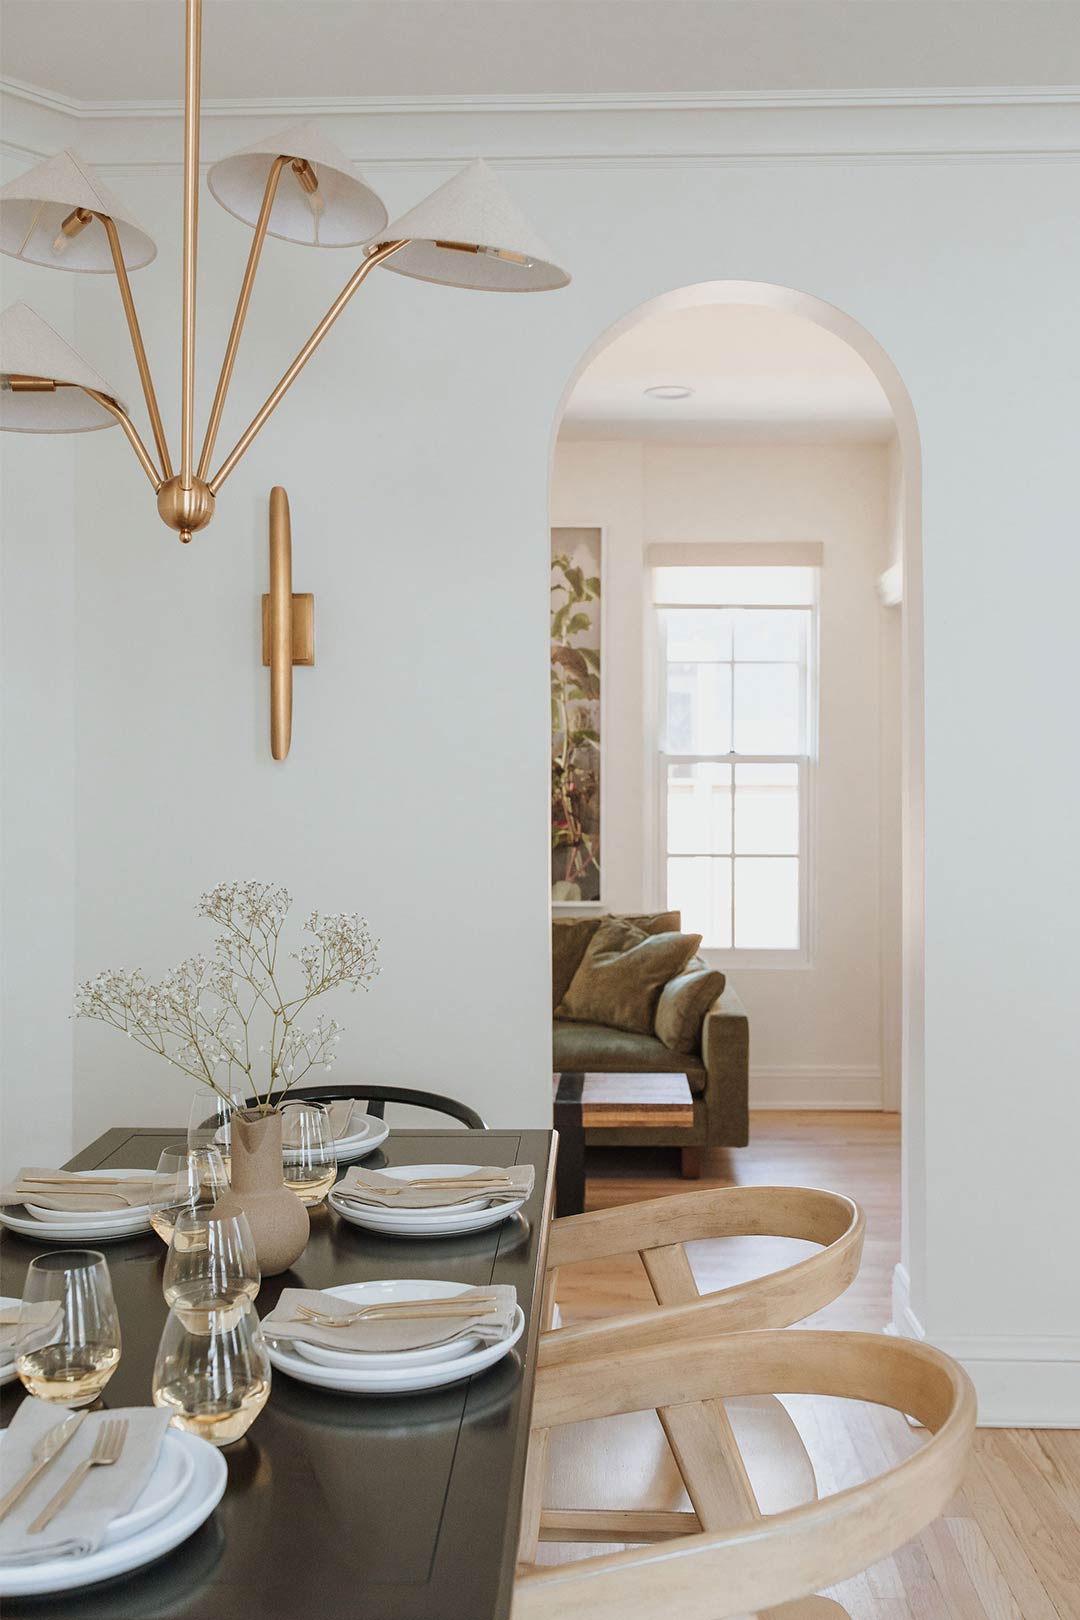 Amber Lewis for Anthropologie Mantis Chandelier paired with a modern brass sconce arched openings / doorways makes this organic modern remodel highlight it's historic Queen Anne features